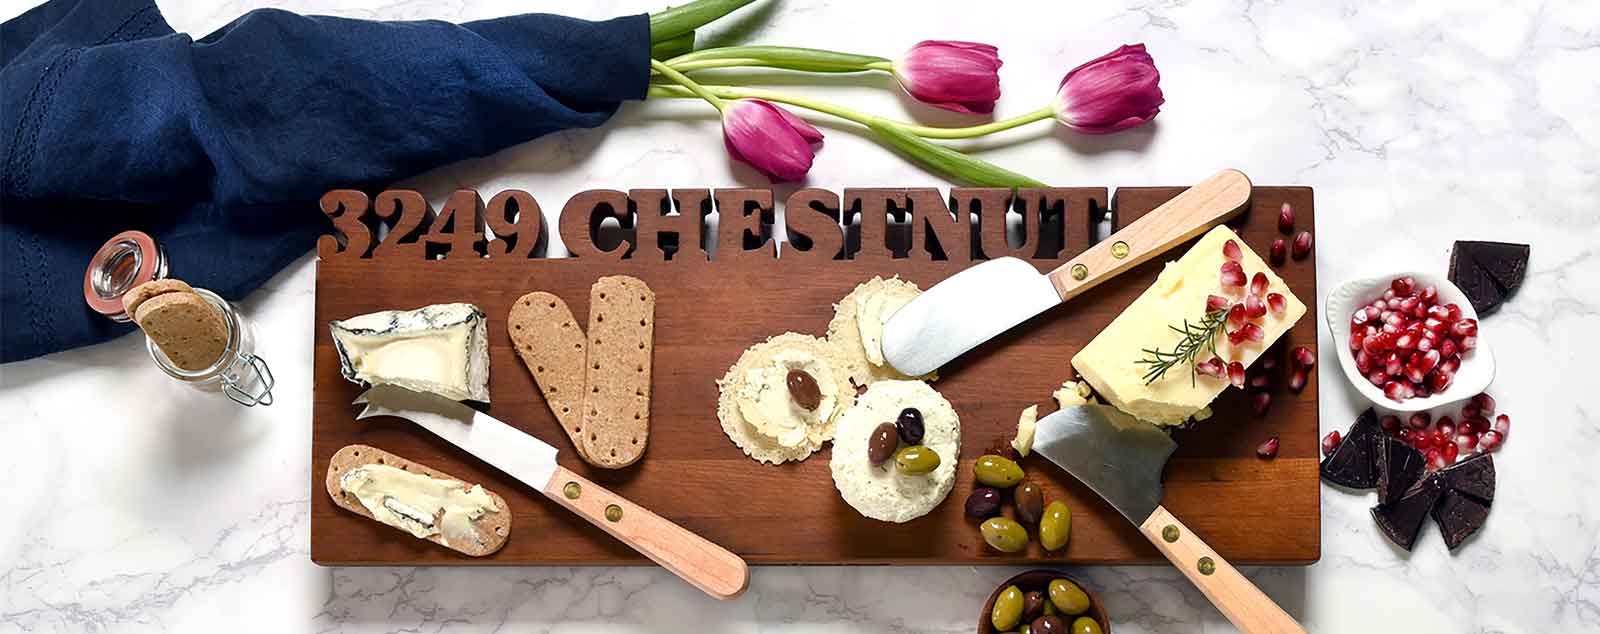 Cutting Boards Perfect for Entertaining